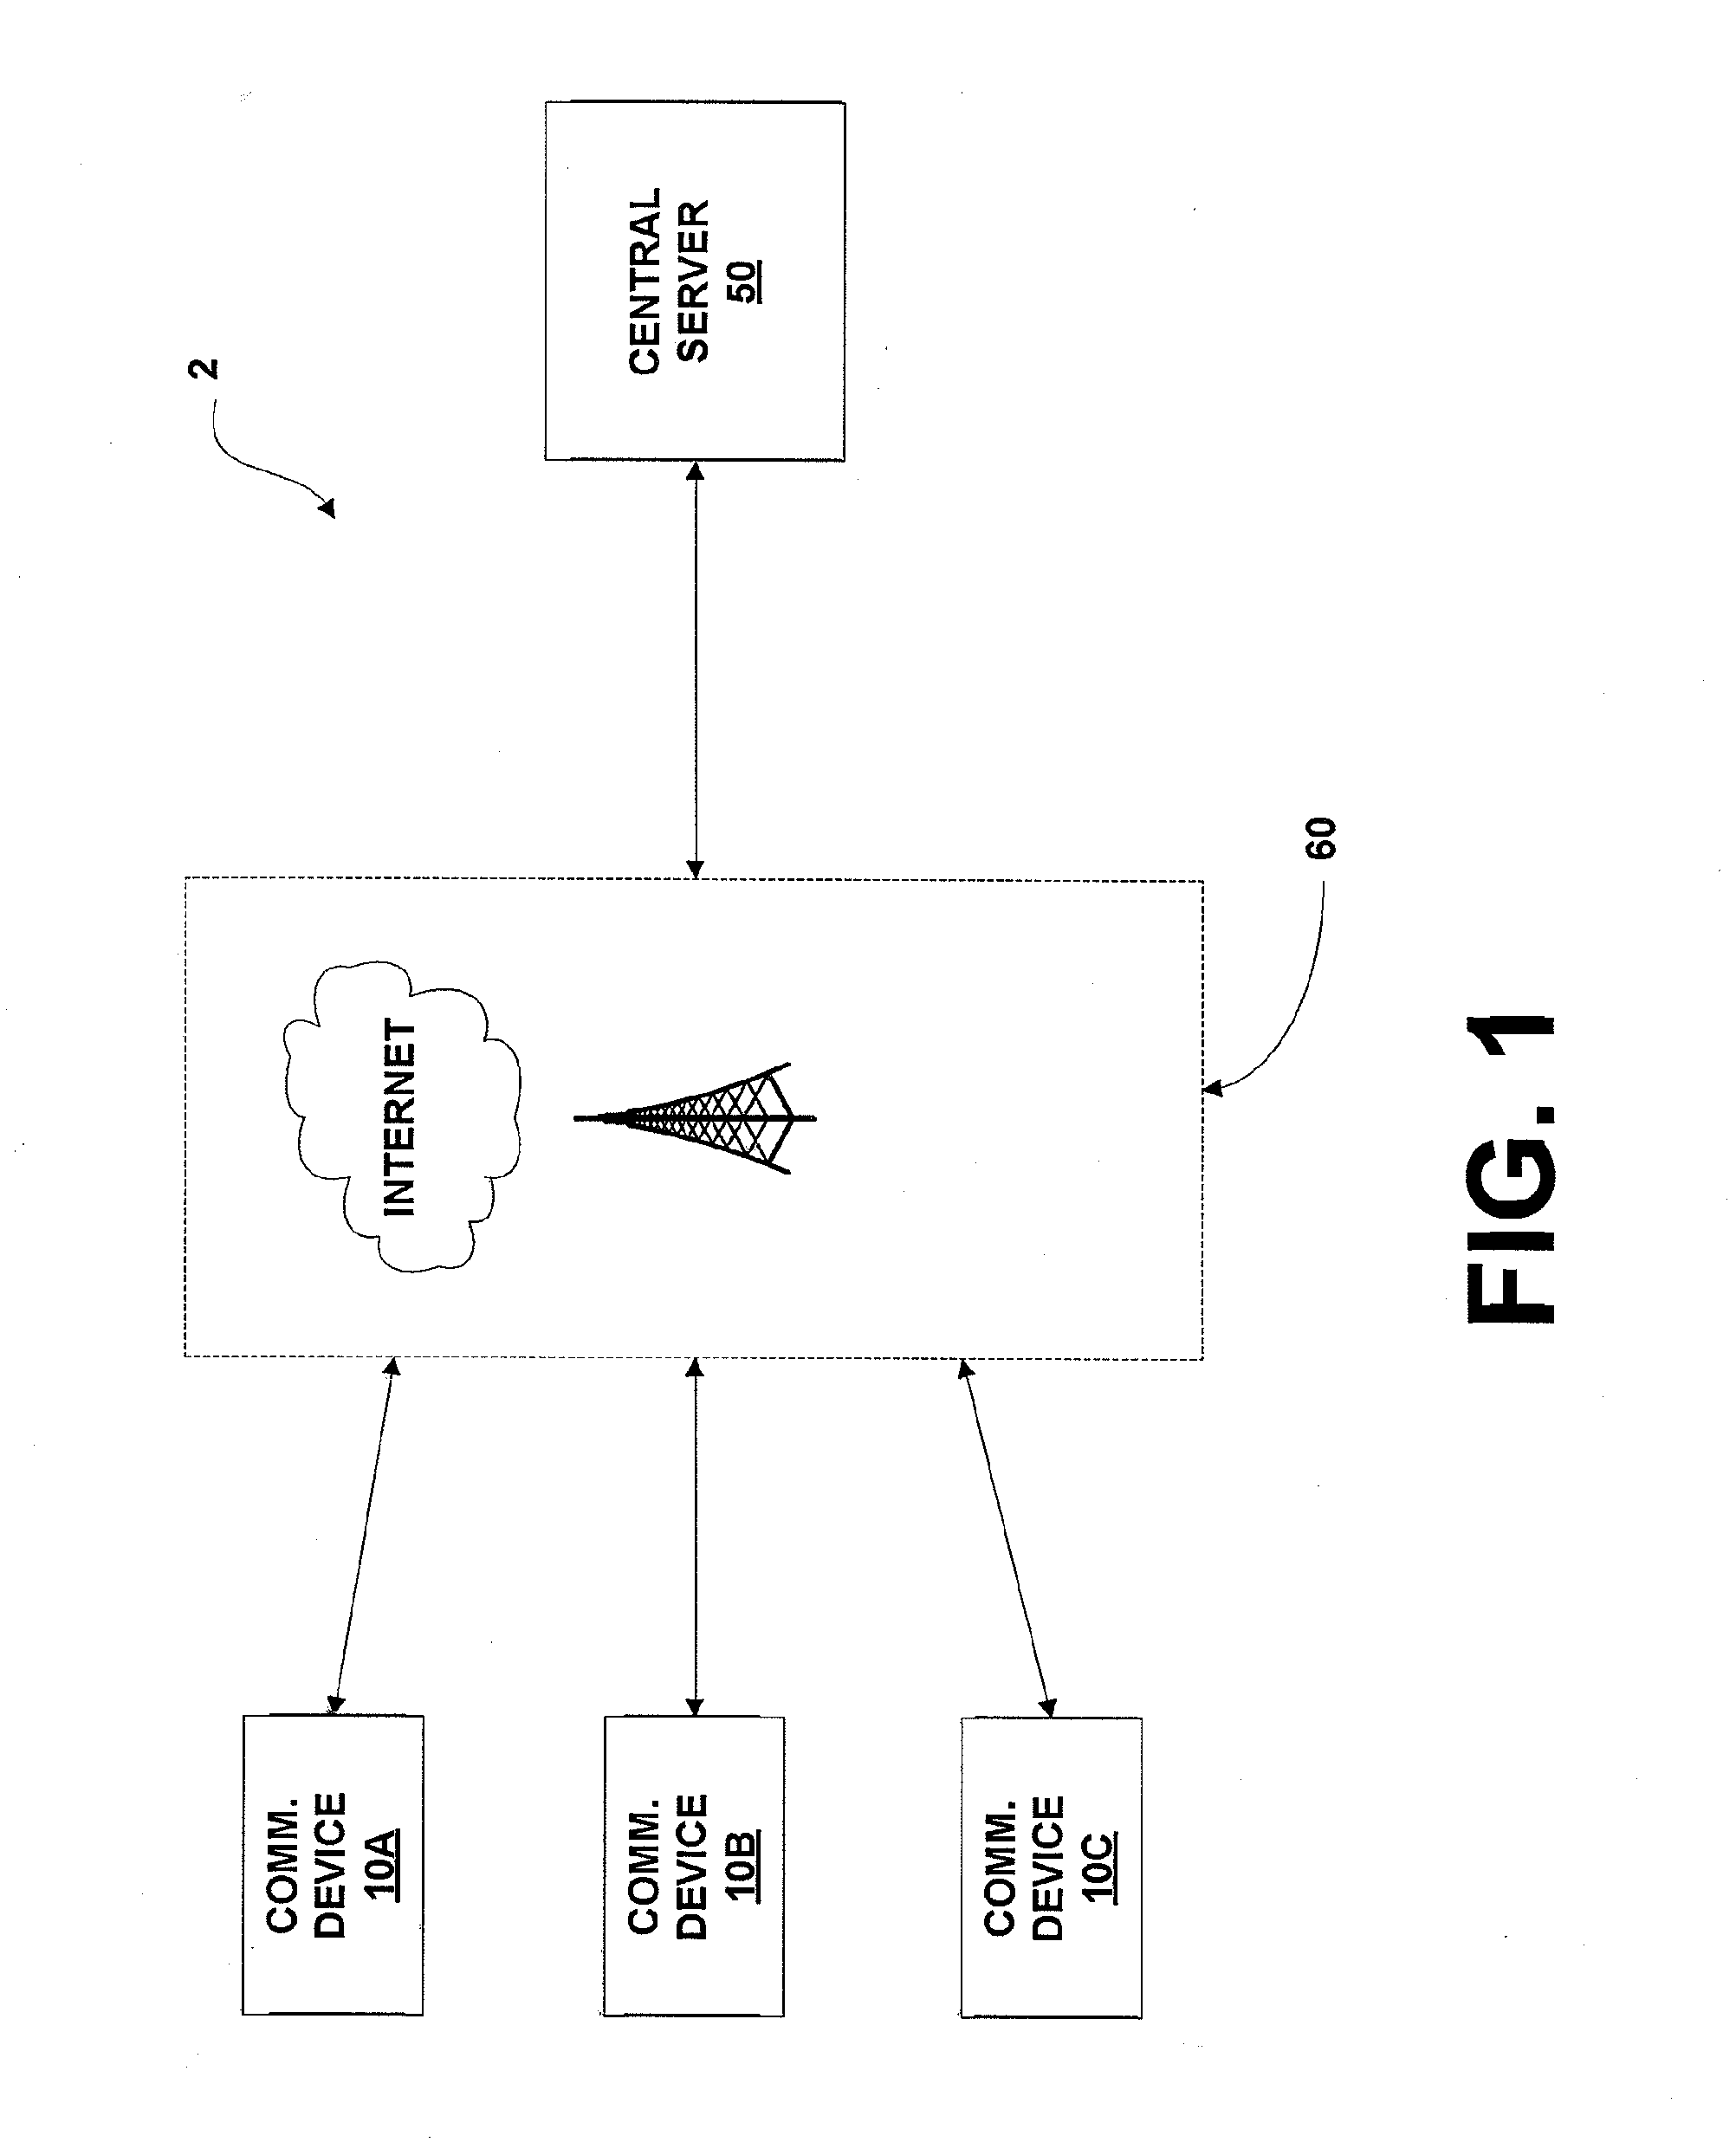 System and method for providing road condition and congestion monitoring